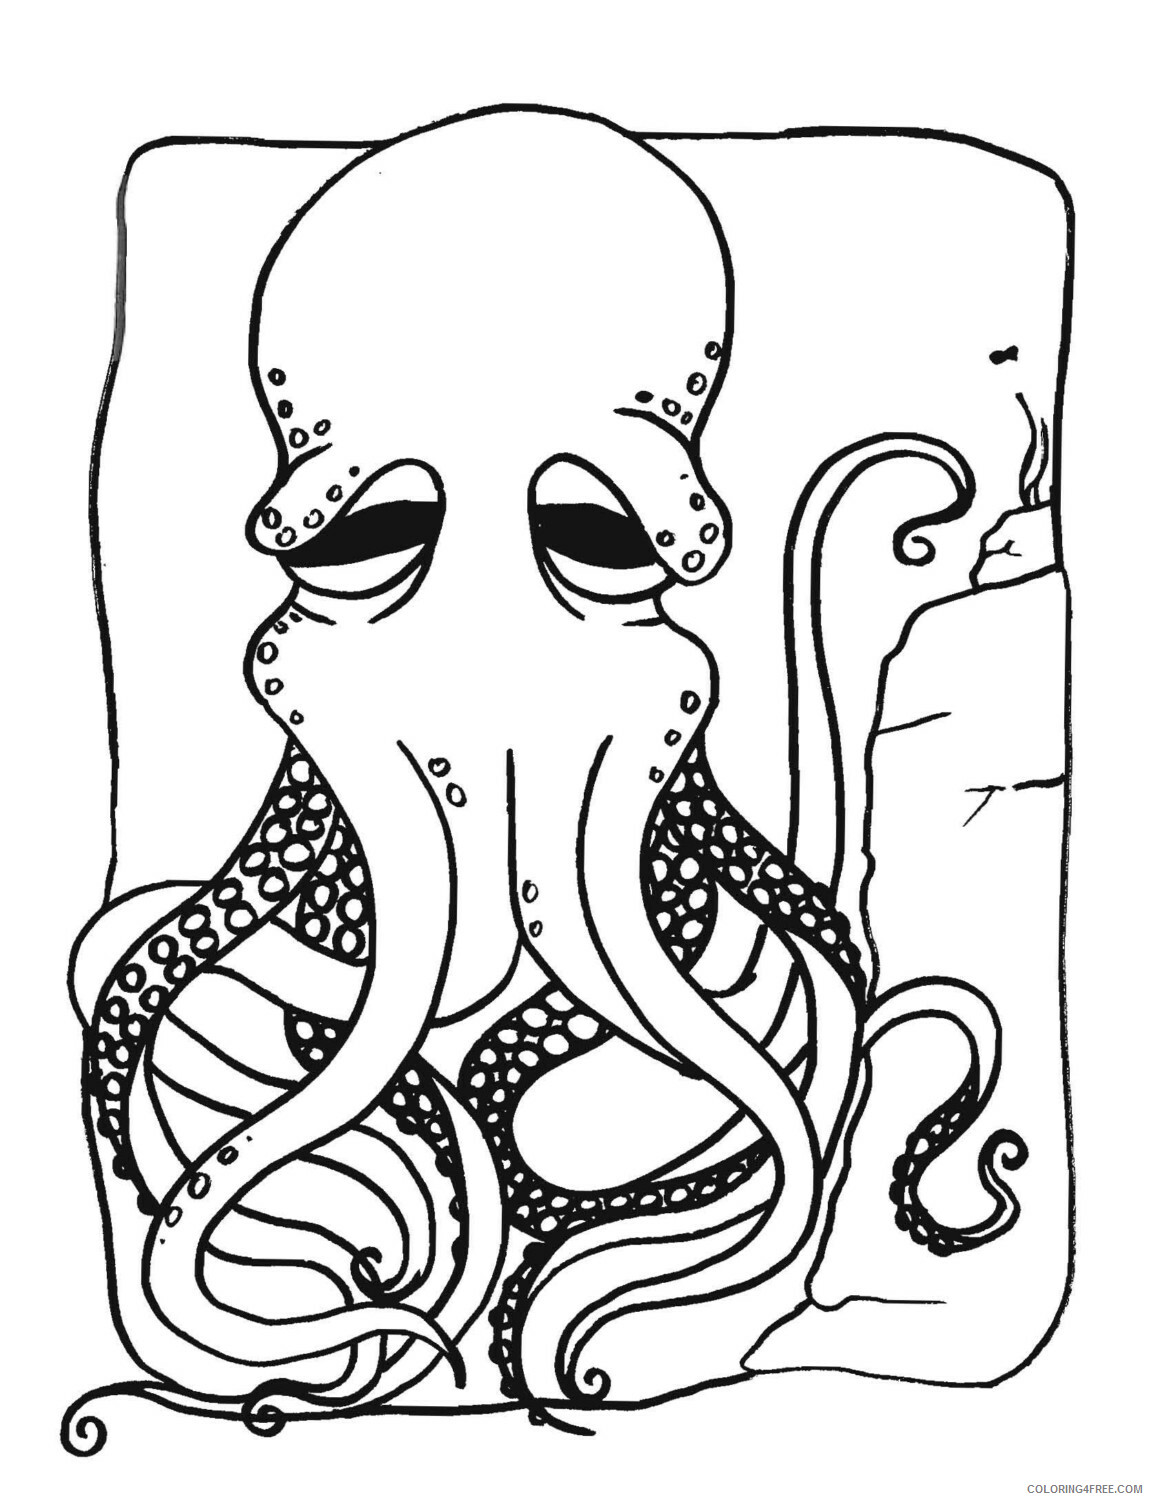 Octopus Coloring Pages Animal Printable Sheets Free Octopus to Print 2021 3505 Coloring4free